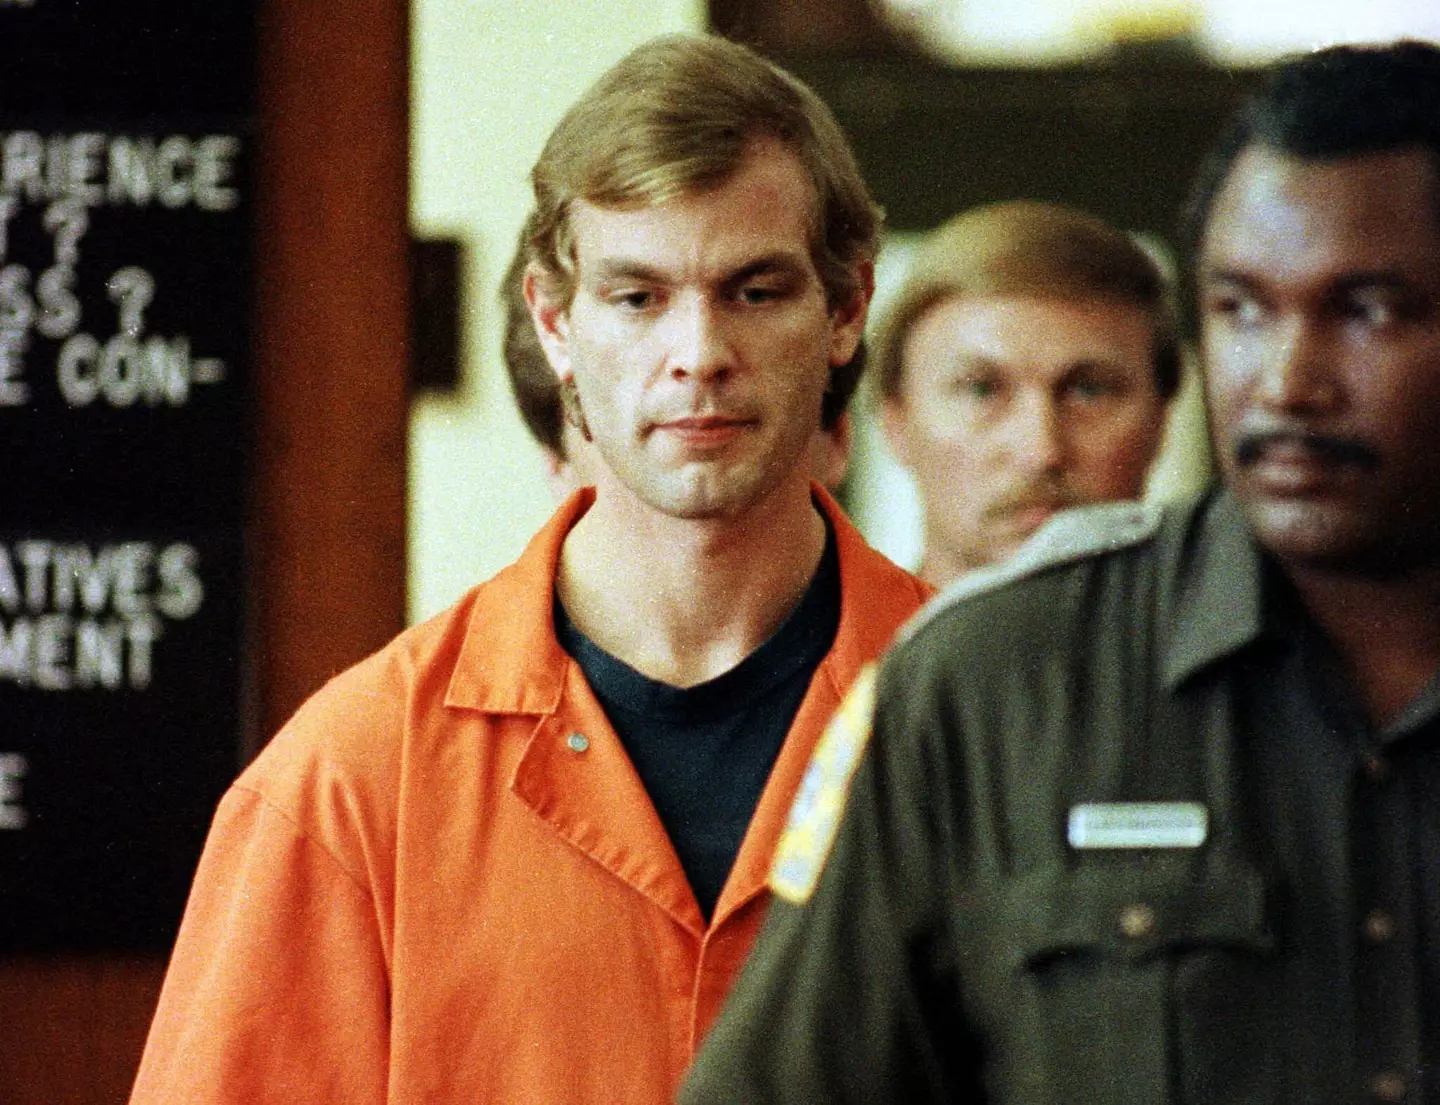 Jeffrey Dahmer killed eight victims from 1978 to 1991.